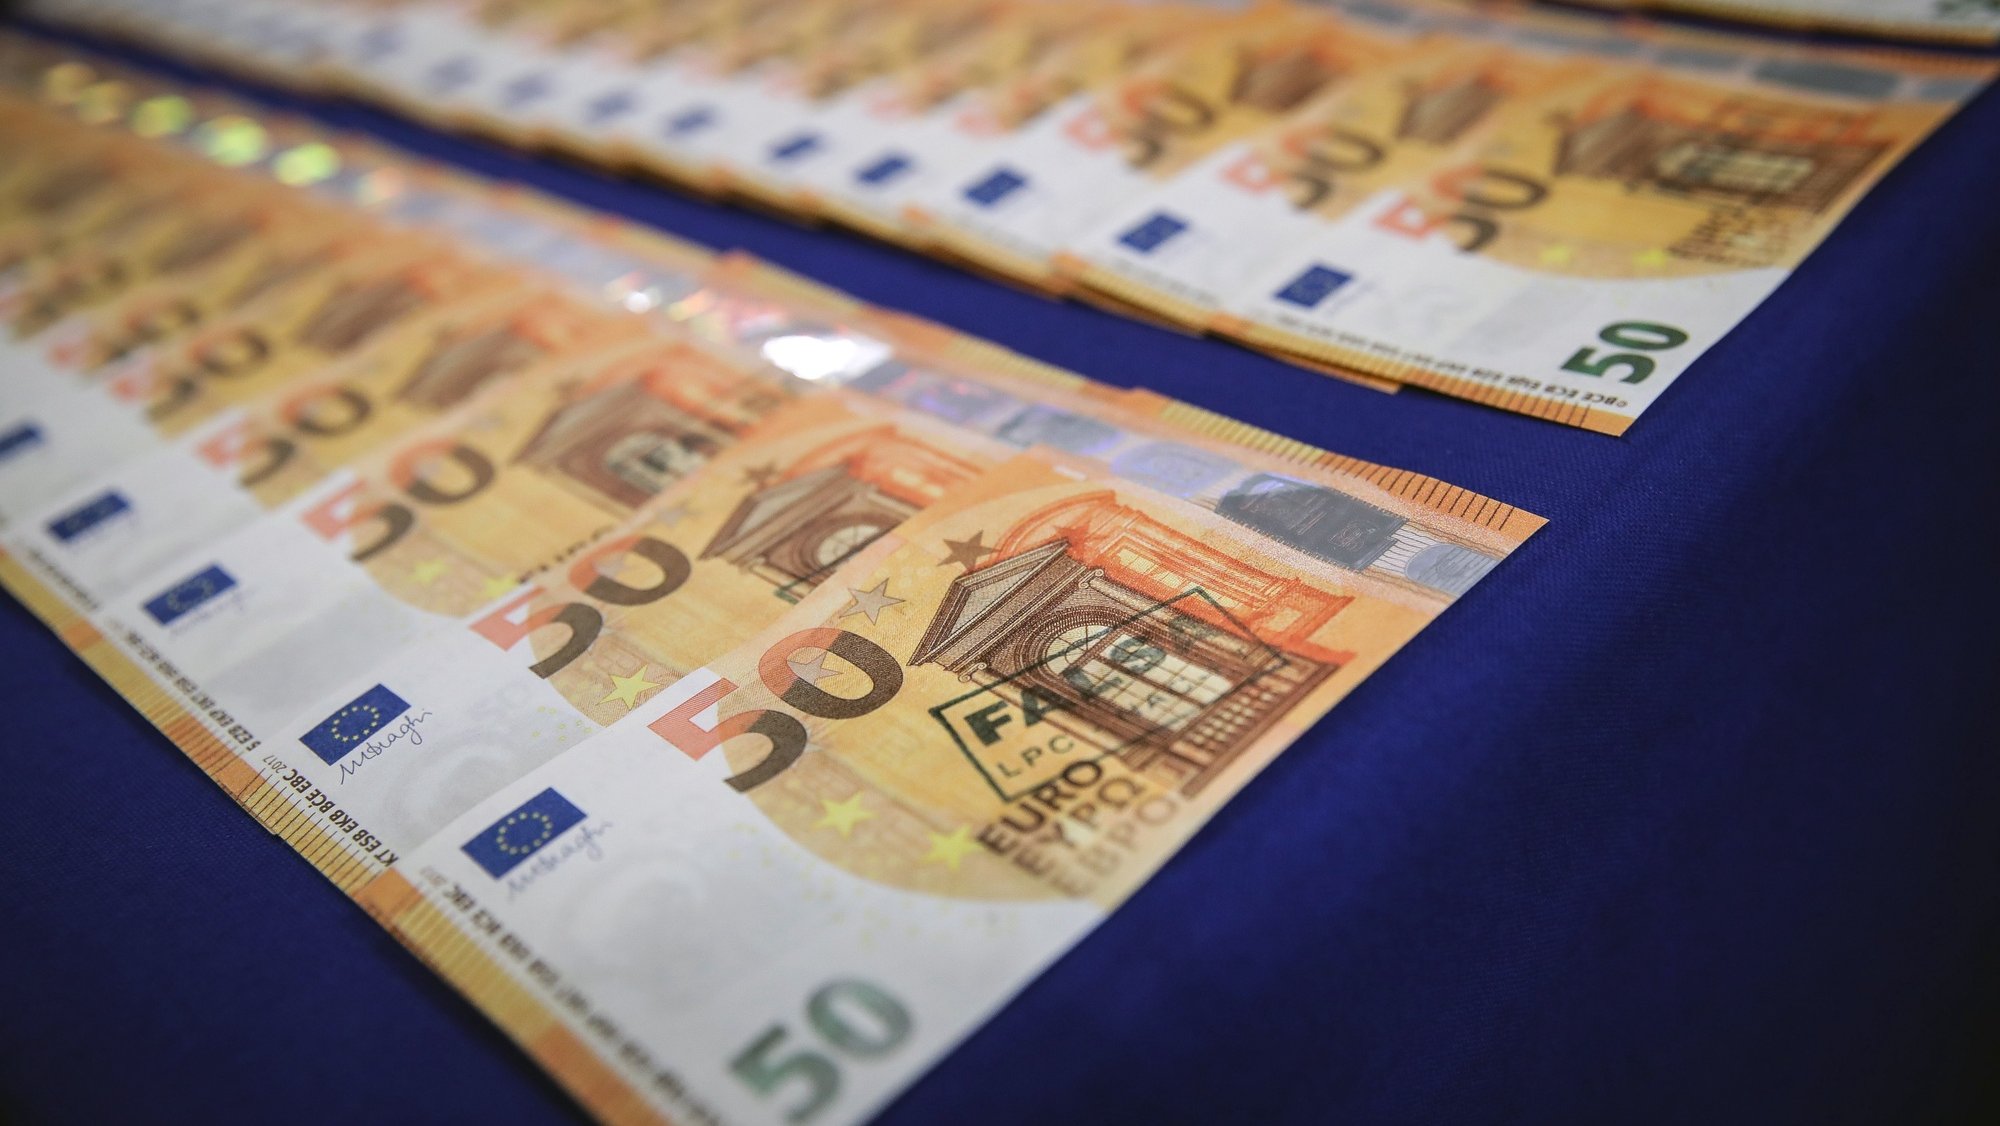 epa07829899 Counterfeit money captured by the Criminal Investigation Police (PJ) in Operation Deep Money is diplayed at the Judicial Police Building in Lisbon, Portugal, 09 September 2019. In collaboration with EUROPOL, PJ has uncovered one of the largest European networks for counterfeit currencies. Five people were arrested and more than 1,800 counterfeit 50 and 10 euro banknotes seized.  EPA/MARIO CRUZ